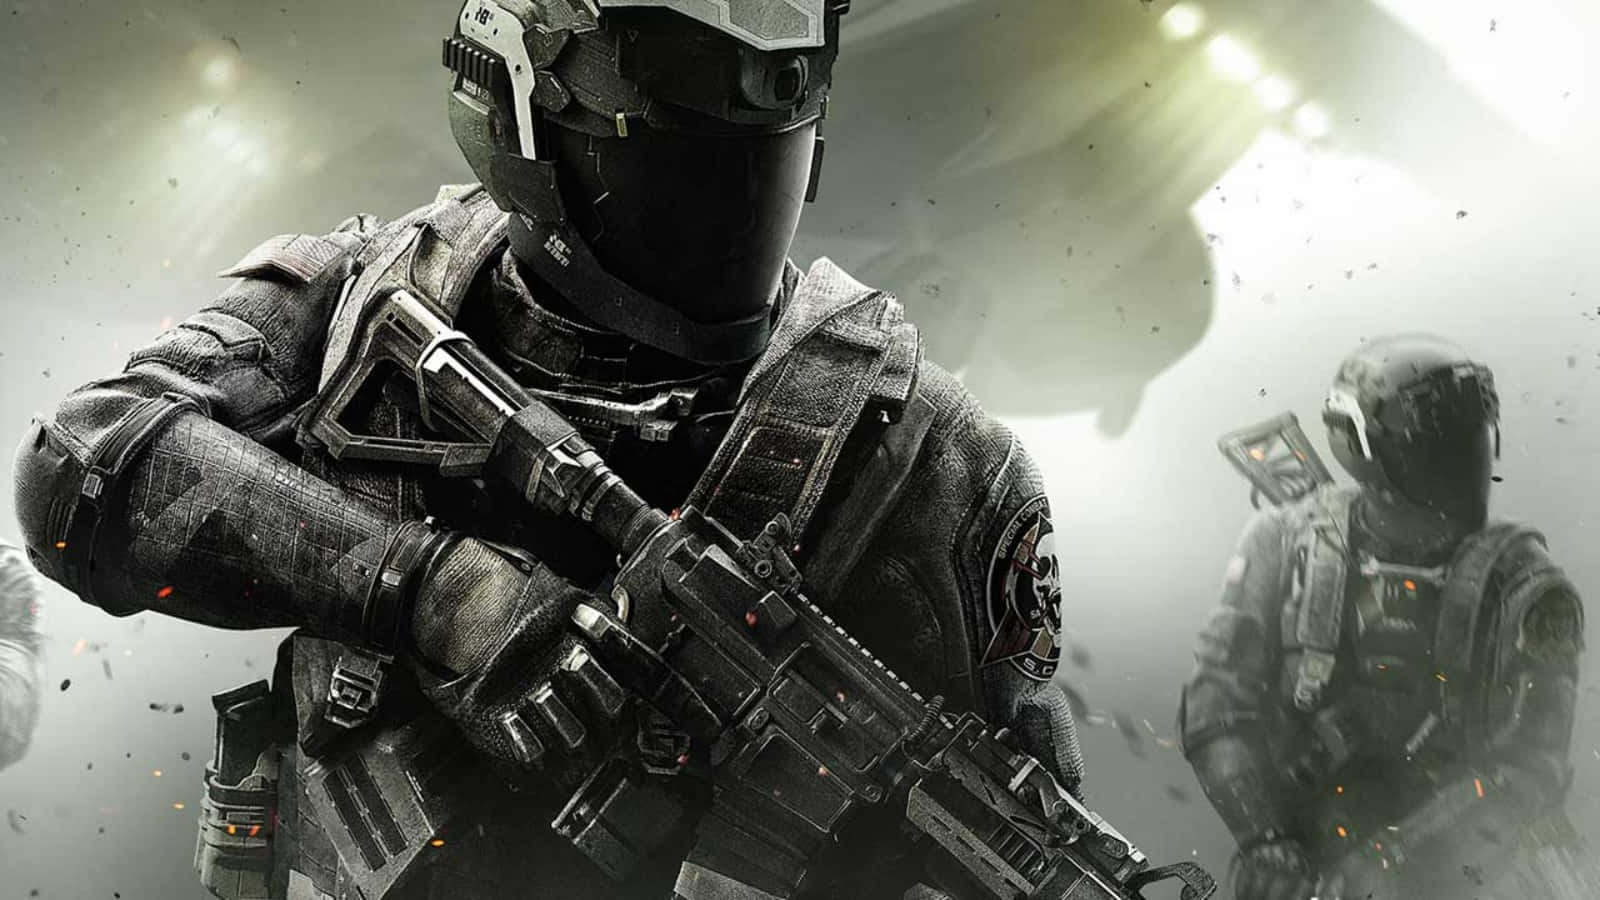 Play Call Of Duty and Join the Epic Online Battle